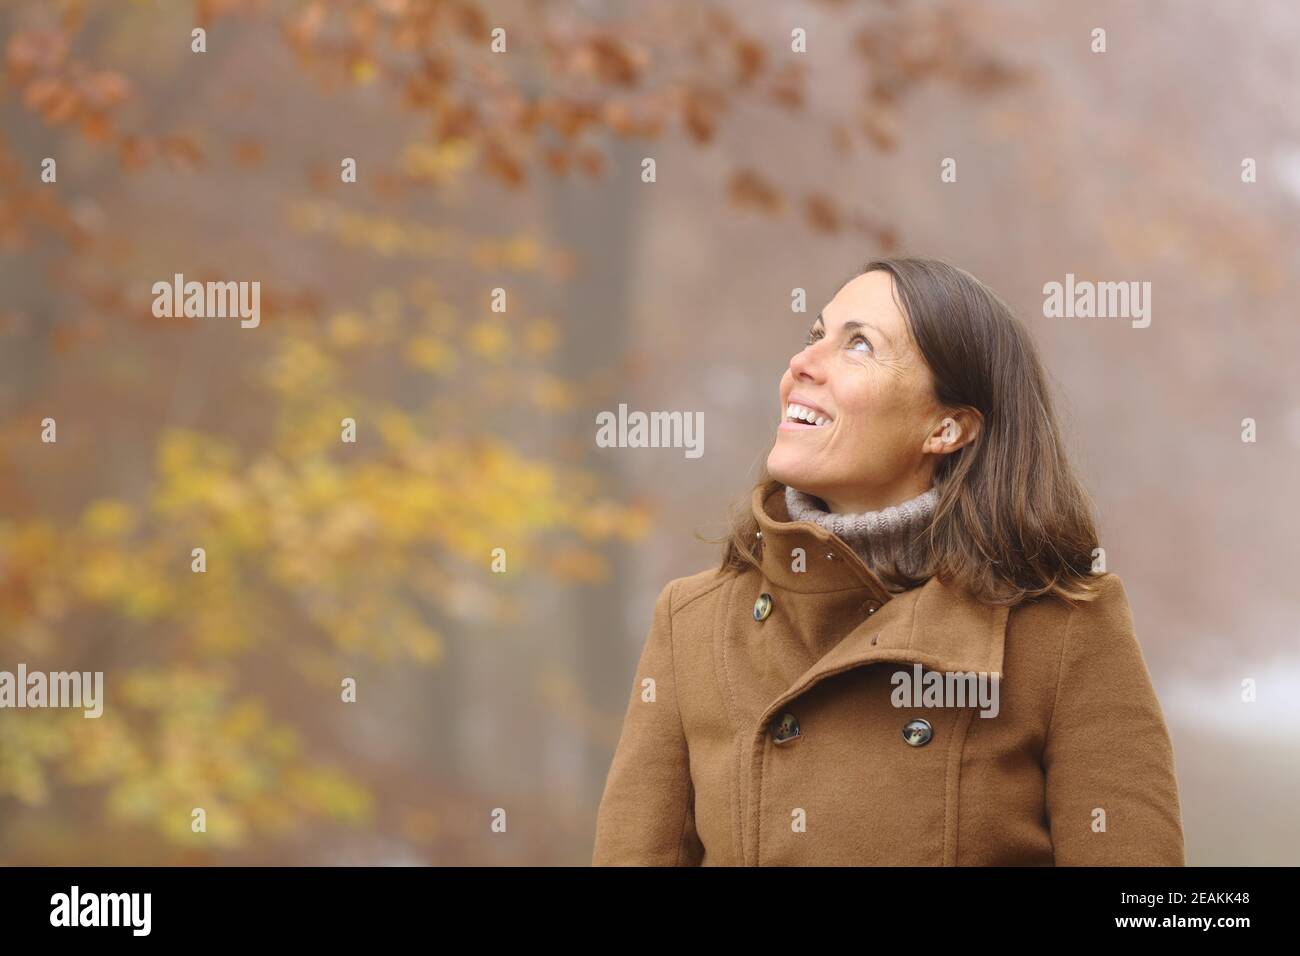 Happy middle age woman contemplating in a forest in fall Stock Photo